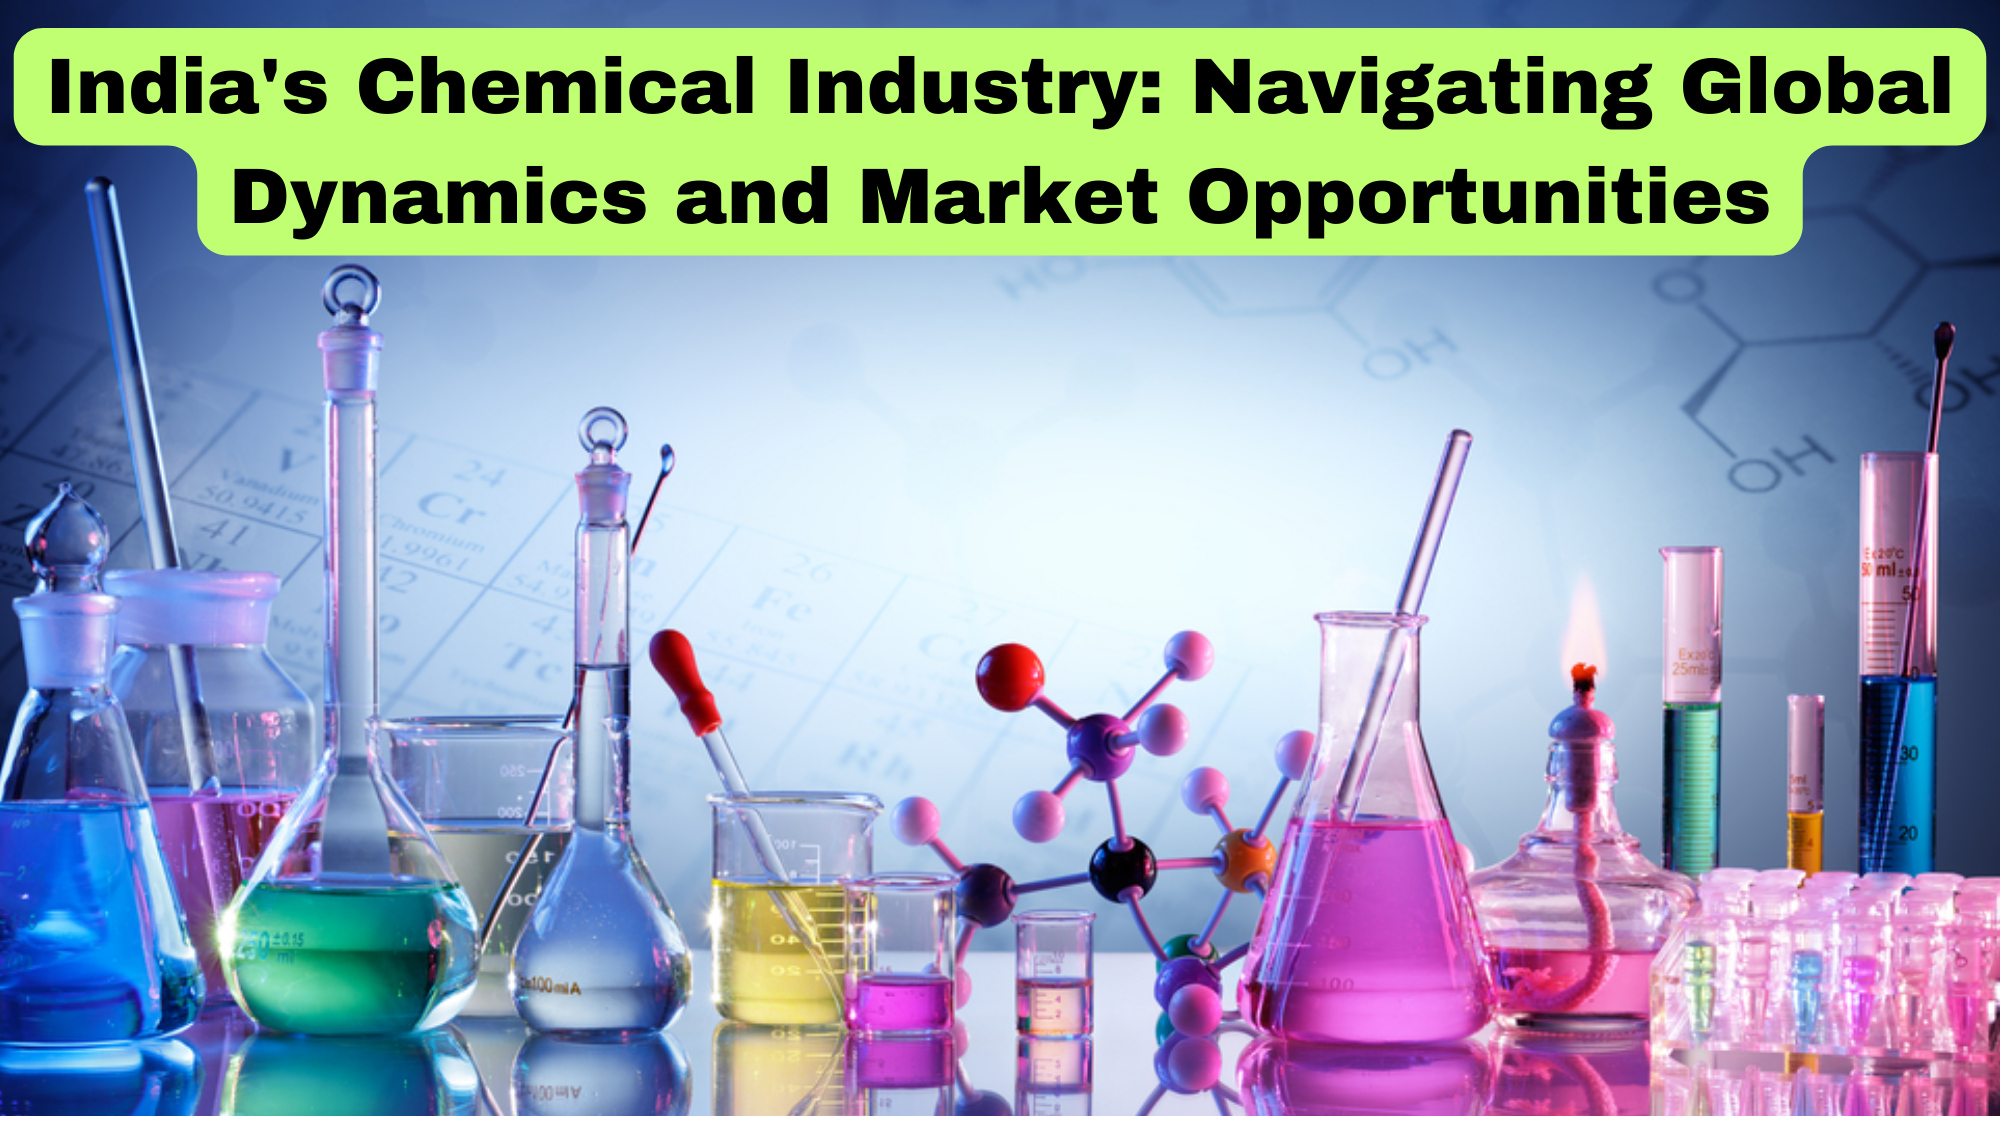 Indian Chemical Industry Overview; Chemical Industry Challenges and Opportunities